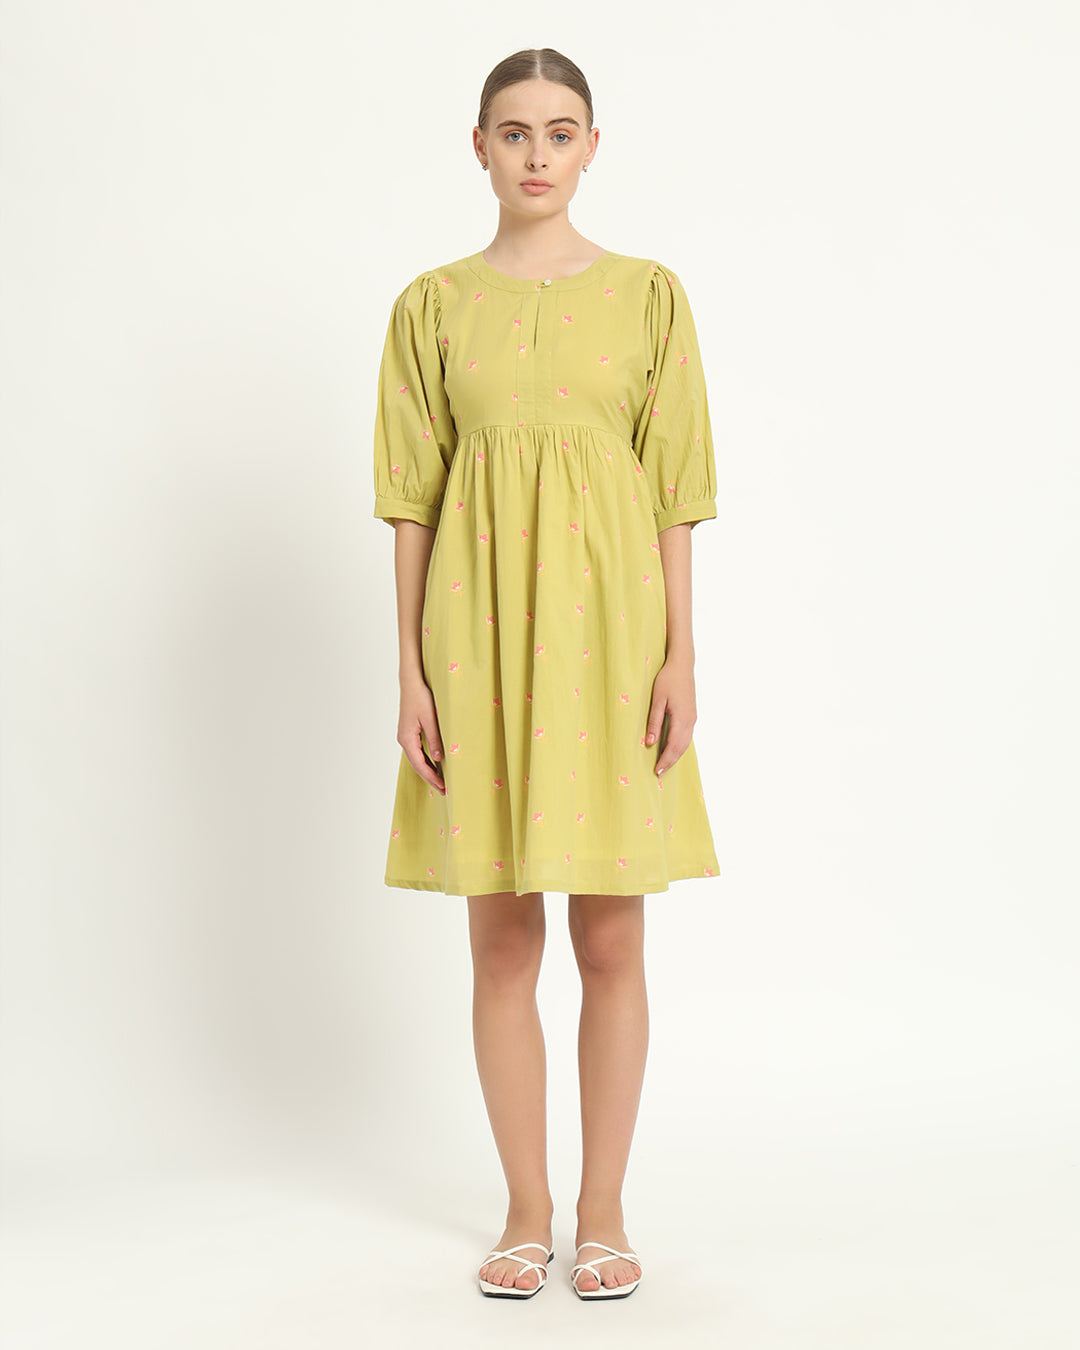 The Aira Lime Cosmos Cotton Dress